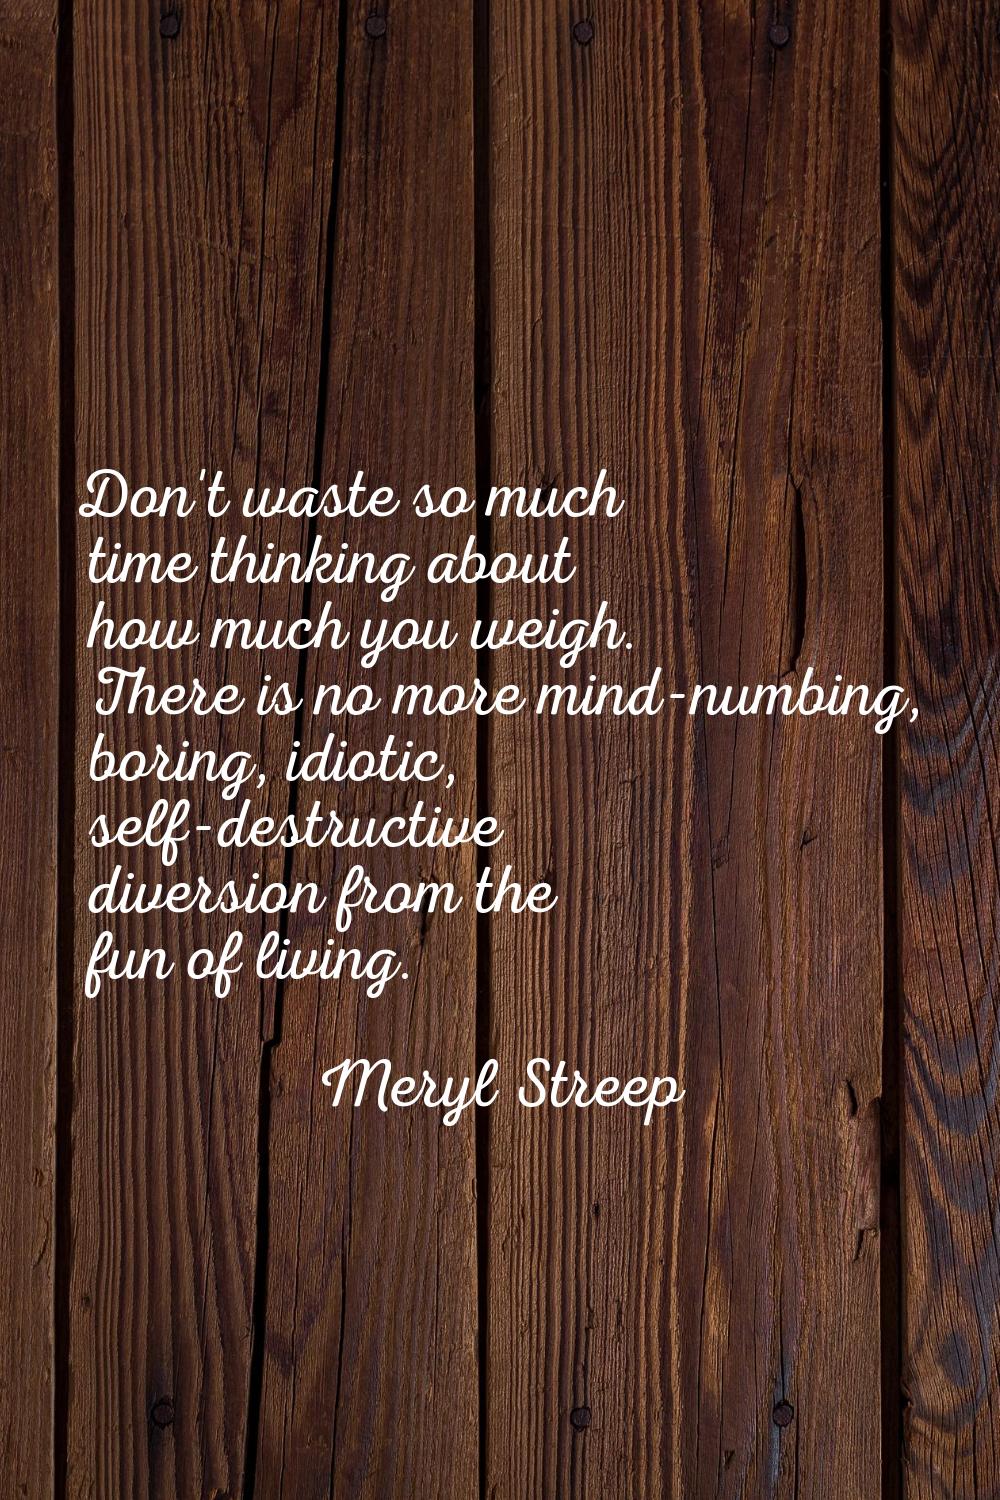 Don't waste so much time thinking about how much you weigh. There is no more mind-numbing, boring, 